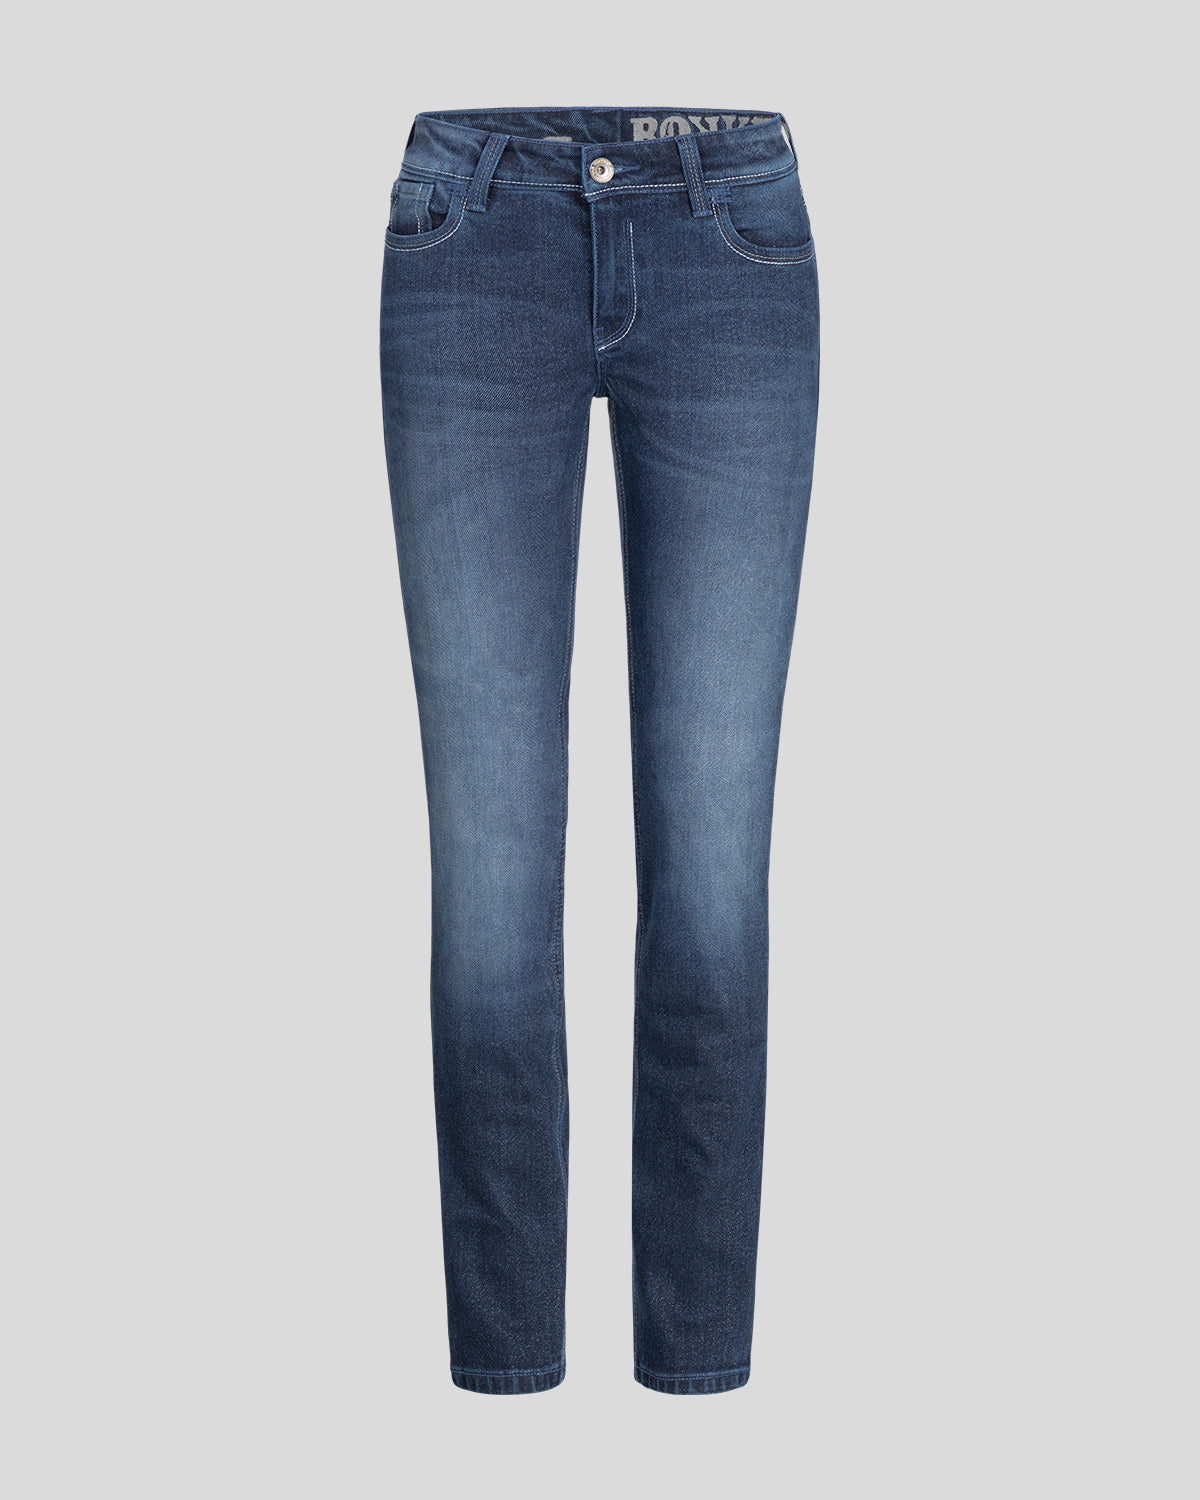 Women's motorcycle jeans that fit like everyday jeans ▻ by ROKKER